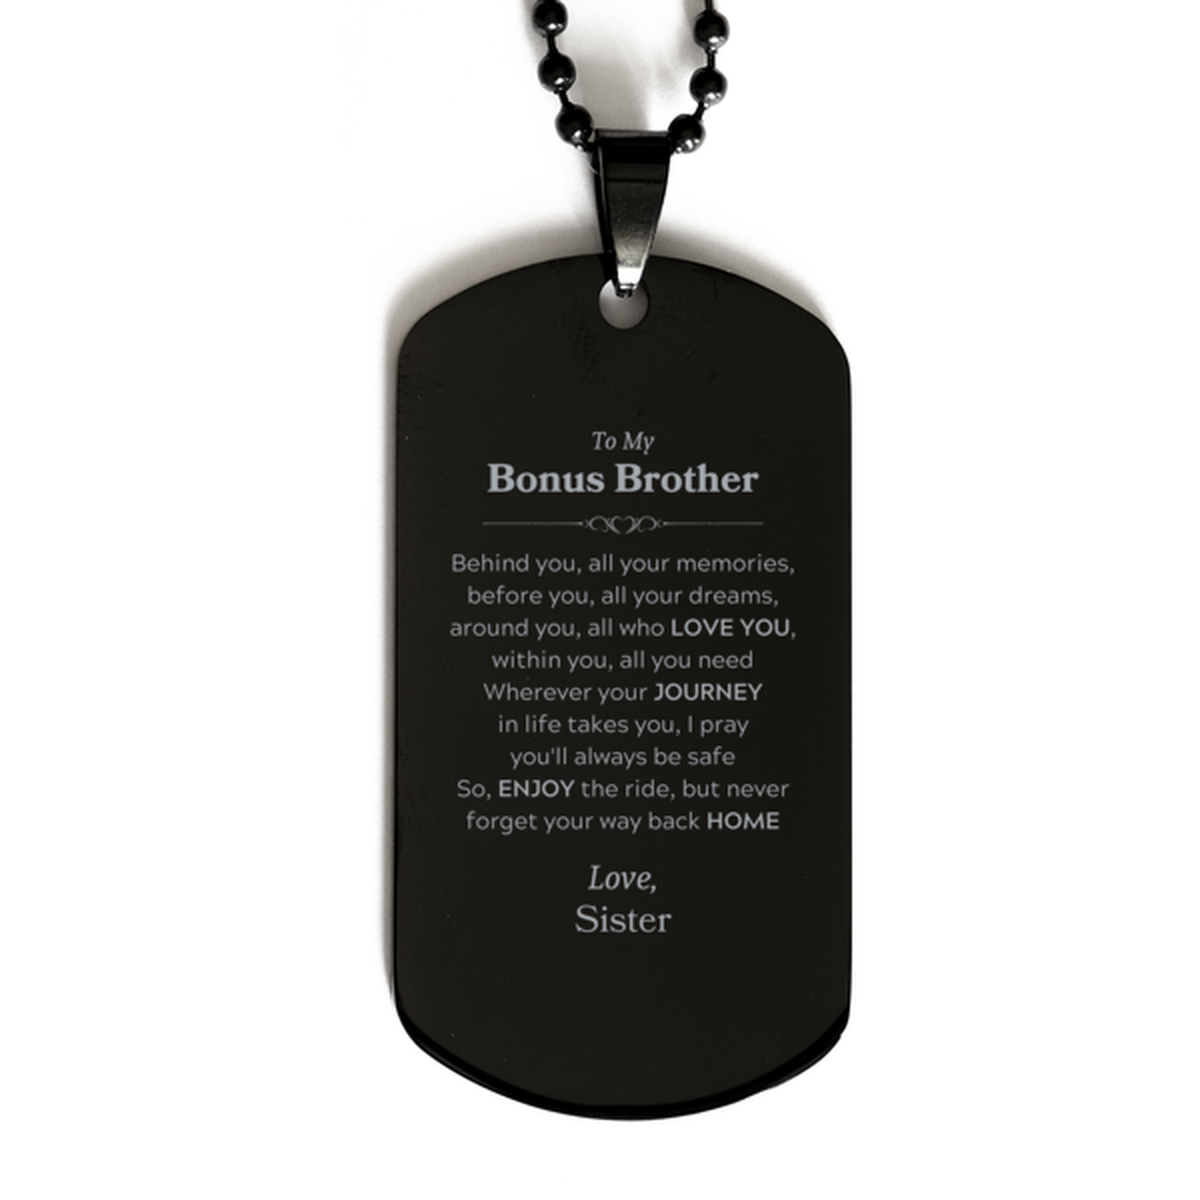 To My Bonus Brother Graduation Gifts from Sister, Bonus Brother Black Dog Tag Christmas Birthday Gifts for Bonus Brother Behind you, all your memories, before you, all your dreams. Love, Sister